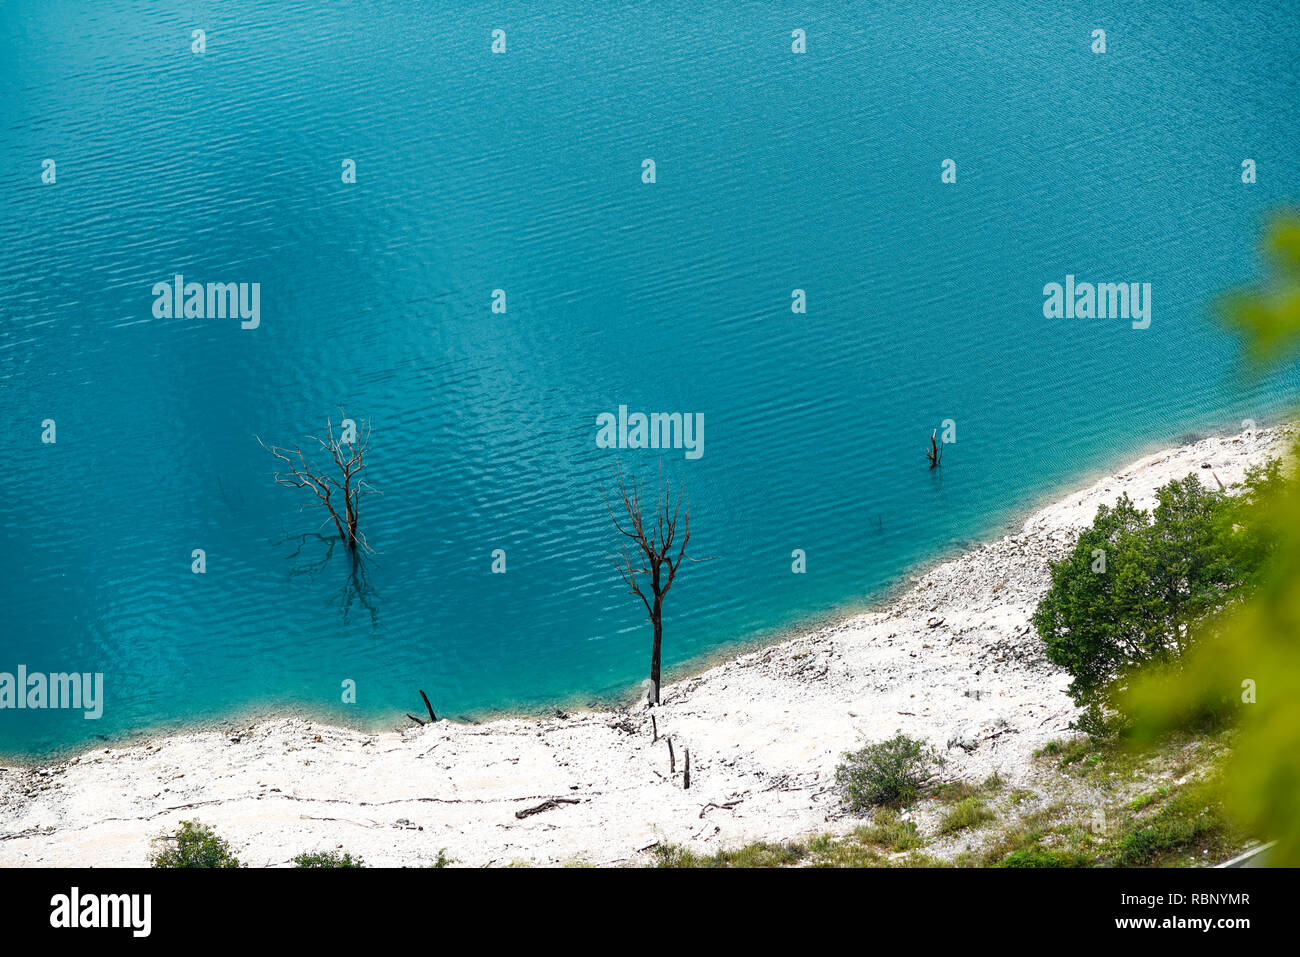 Dried trees protruding from the turquoise lake. Stock Photo